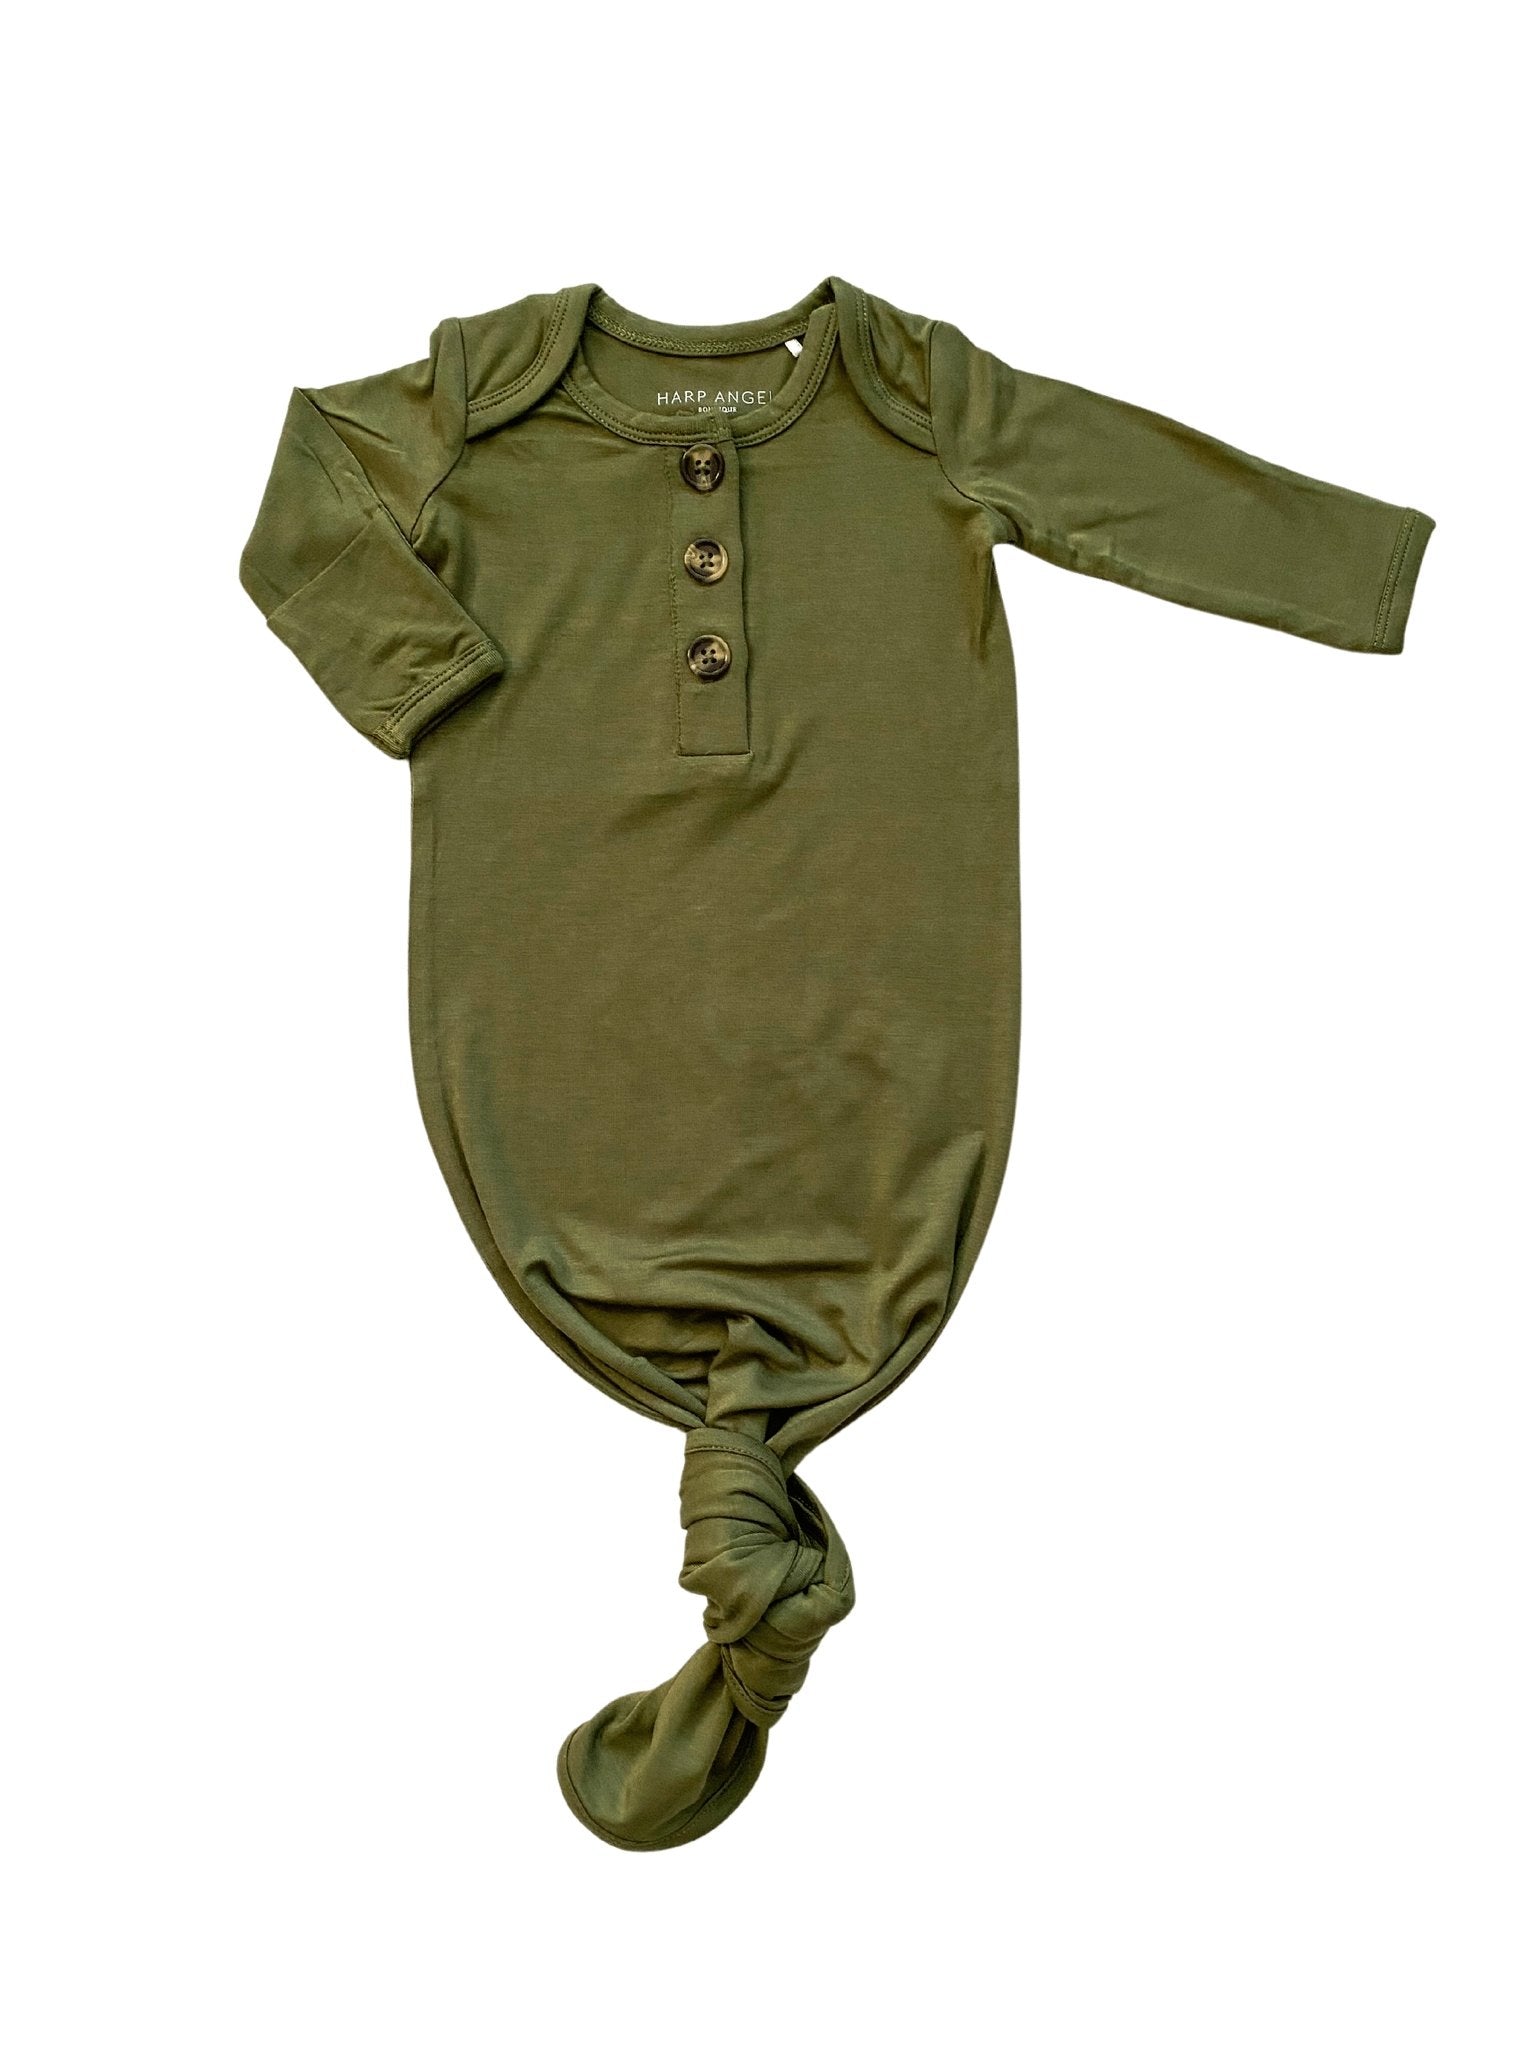 Knotted Baby Gown - Olive Green - Harp Angel Boutique